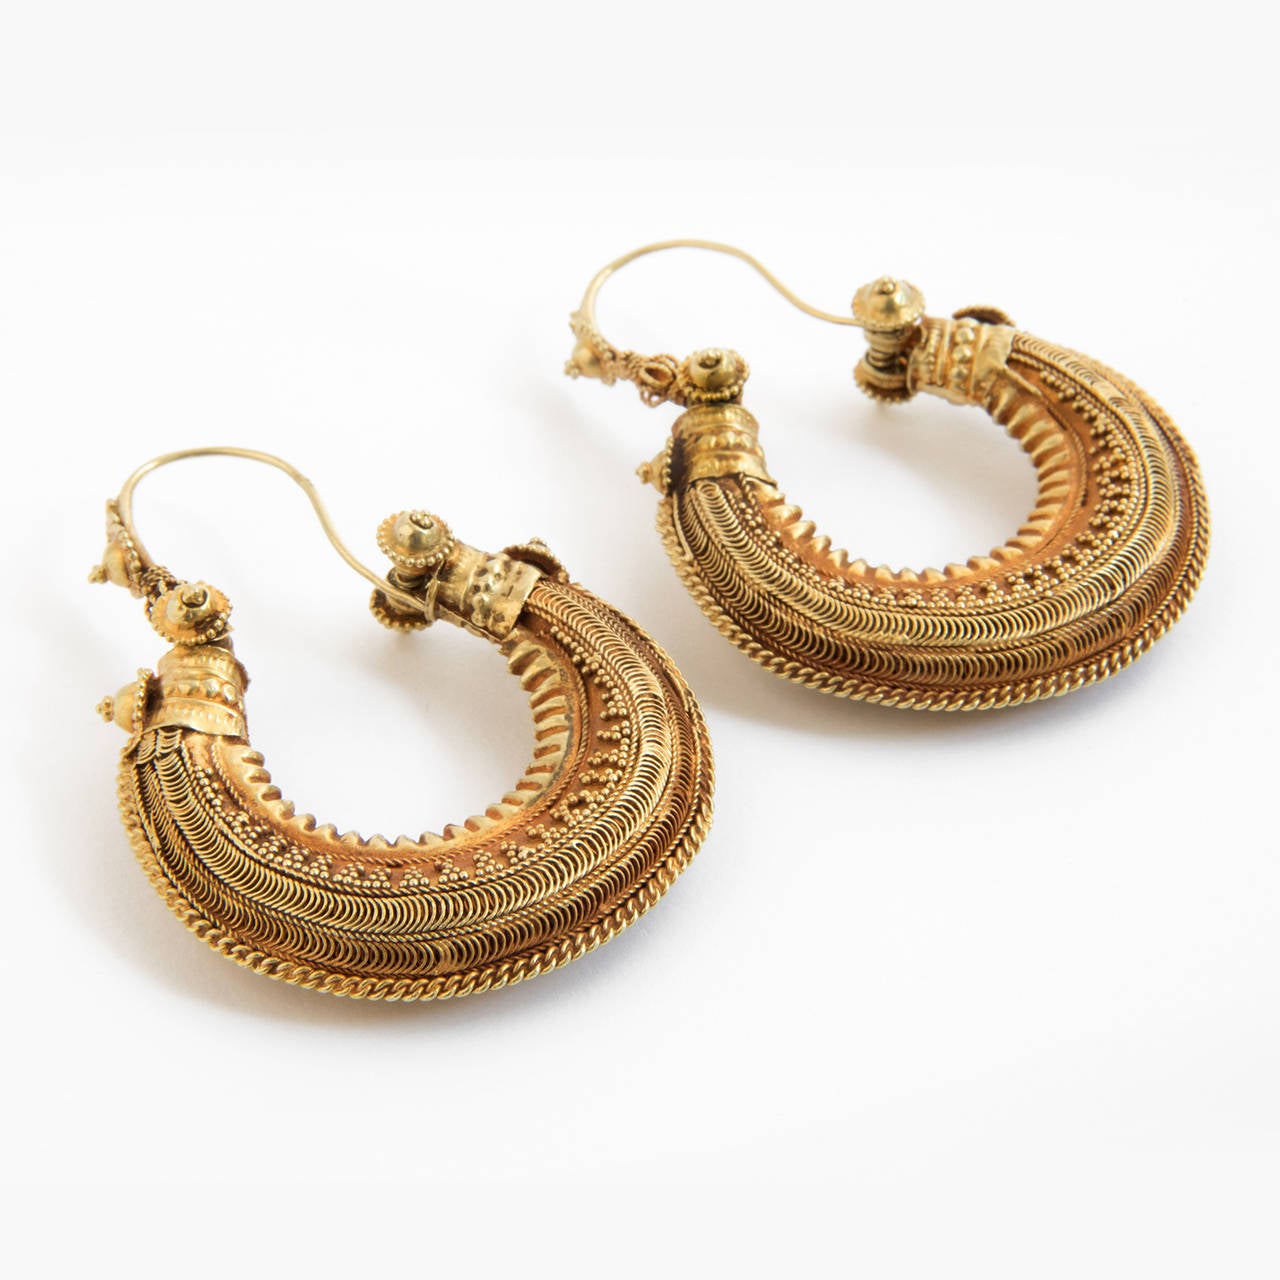 A pair of gold earrings, OGANIA, ornamented with granulation (RAWA) and stamped units. India, Gujarath, early 20th century

These earrings, OGANIA, were worn by the women and men of the Rabari, Bharvad tribe and Rajput as traditional wedding